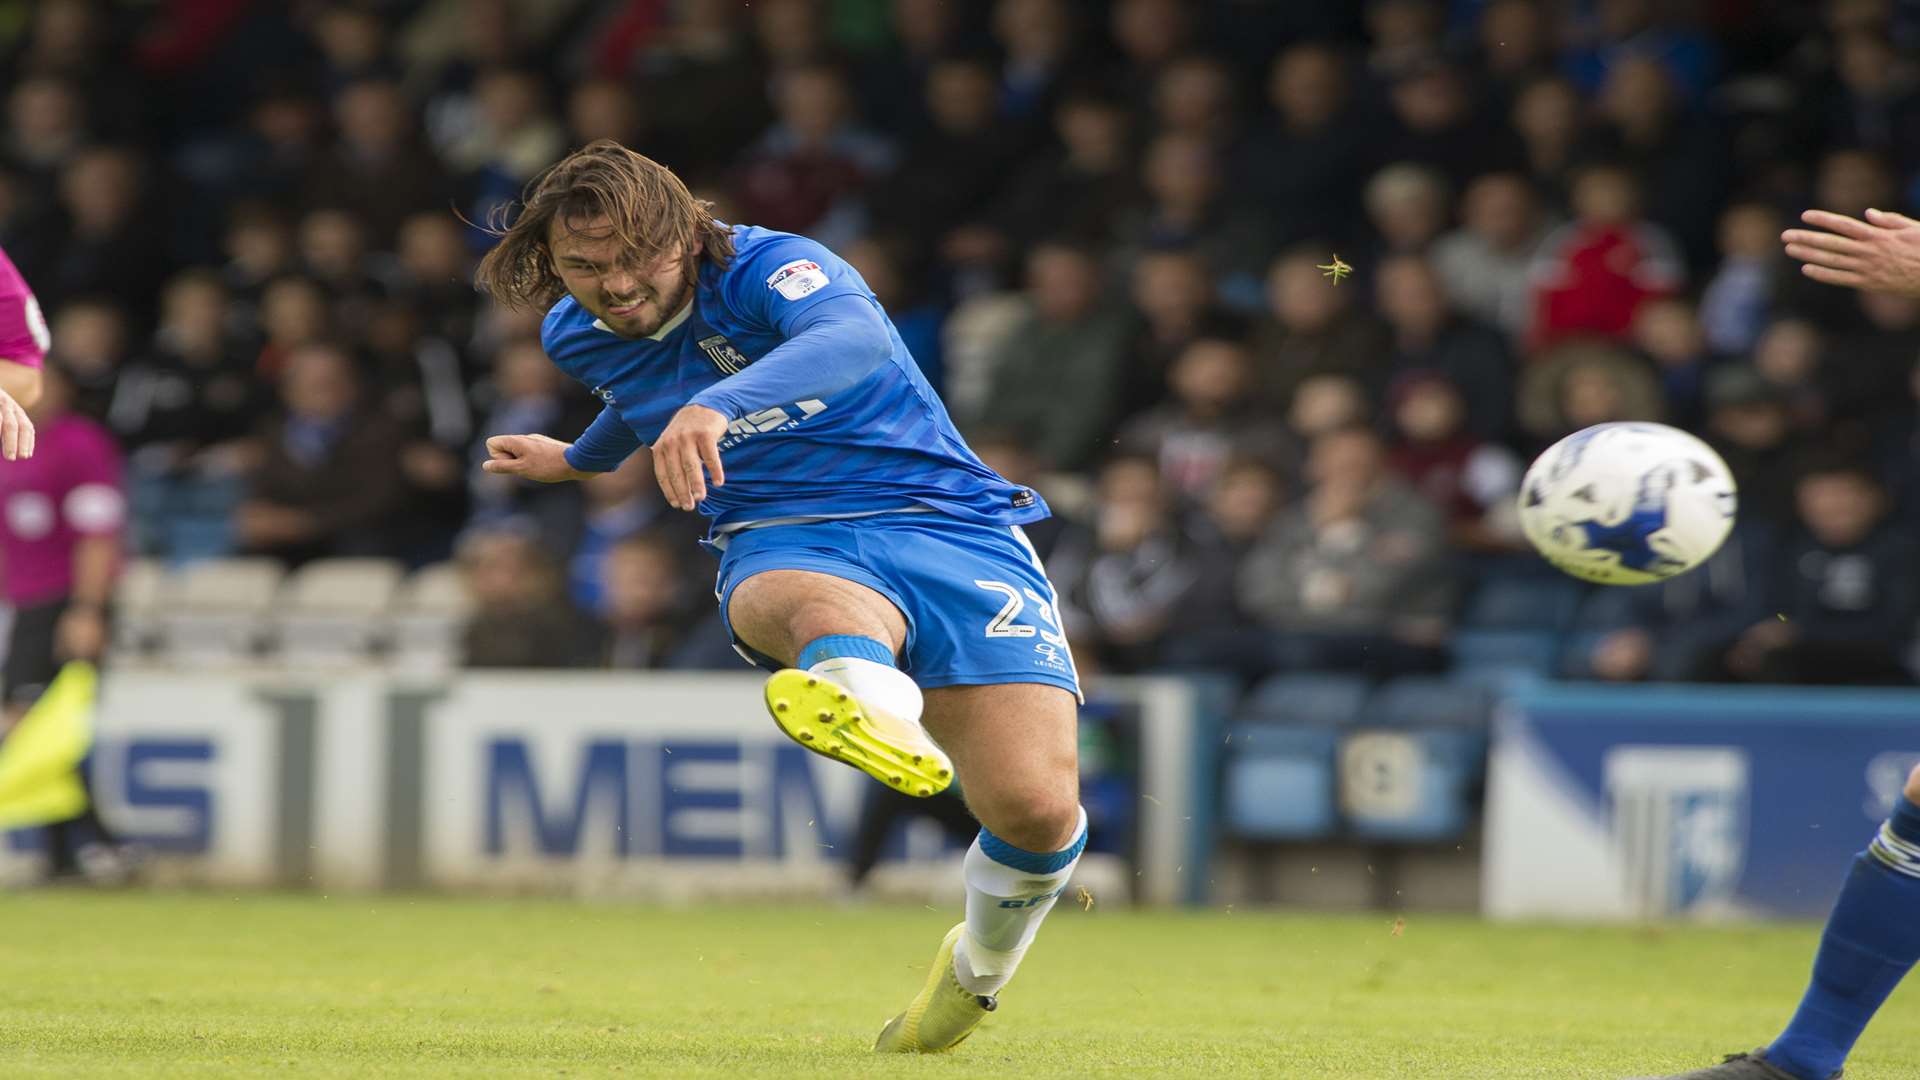 Bradley Dack shoots at goal Picture: Andy Payton